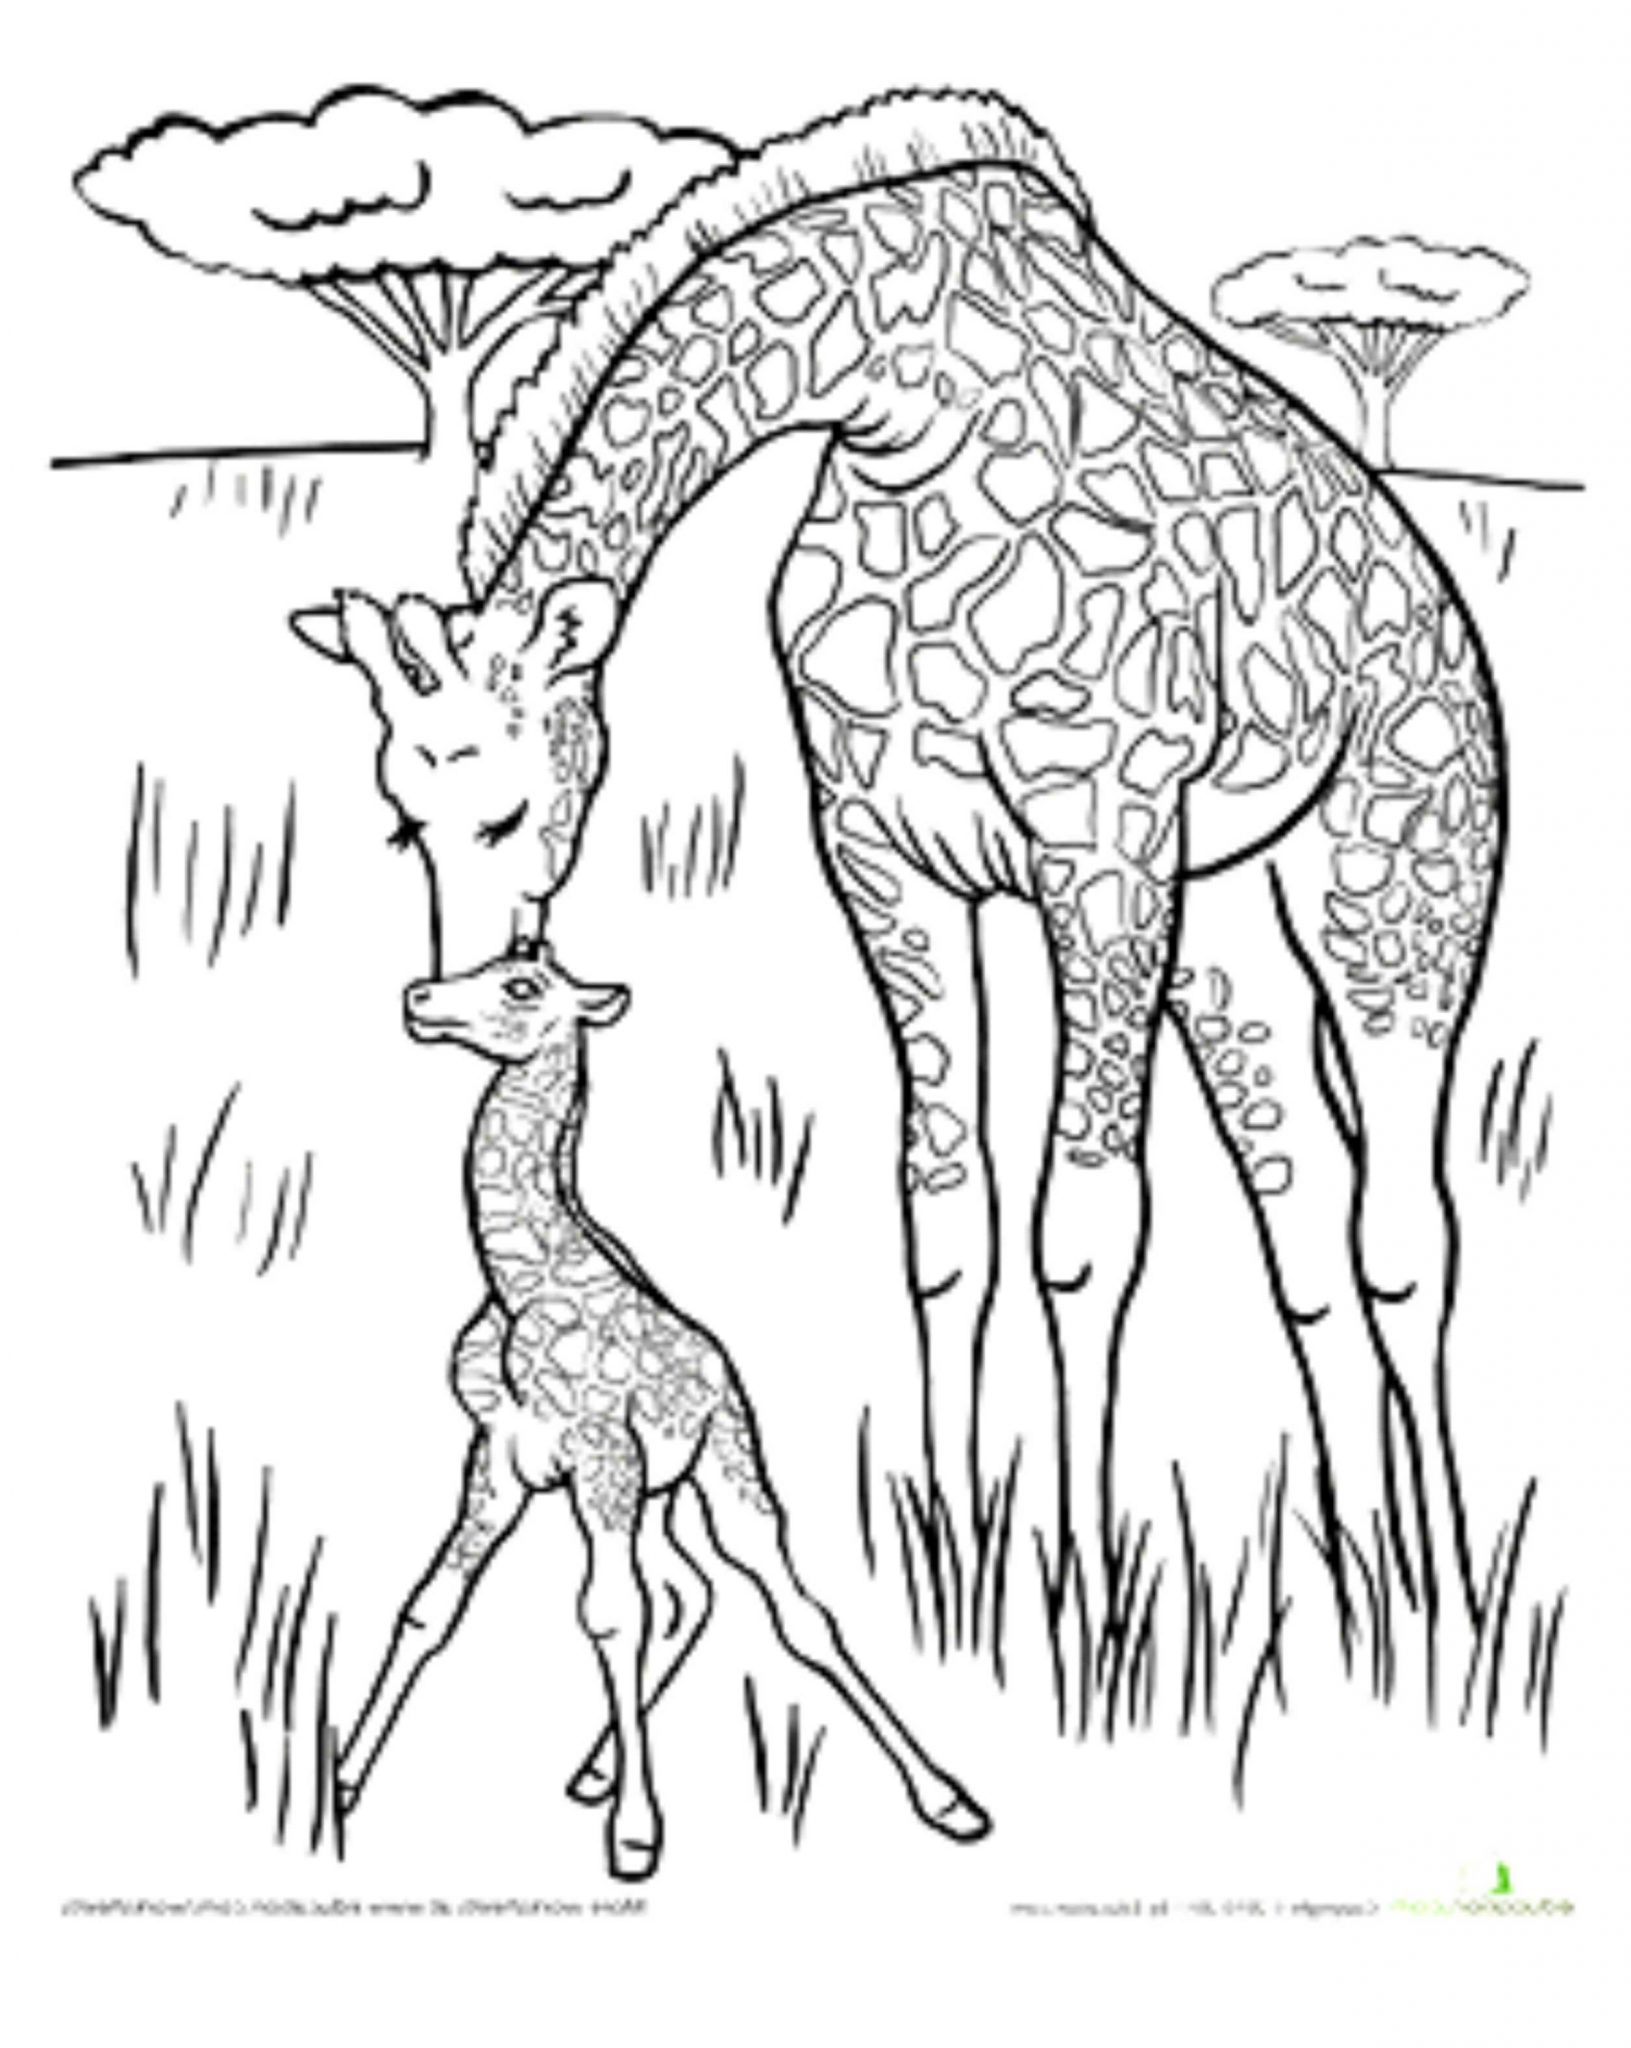 giraffe-coloring-pages-printable-bestappsforkids